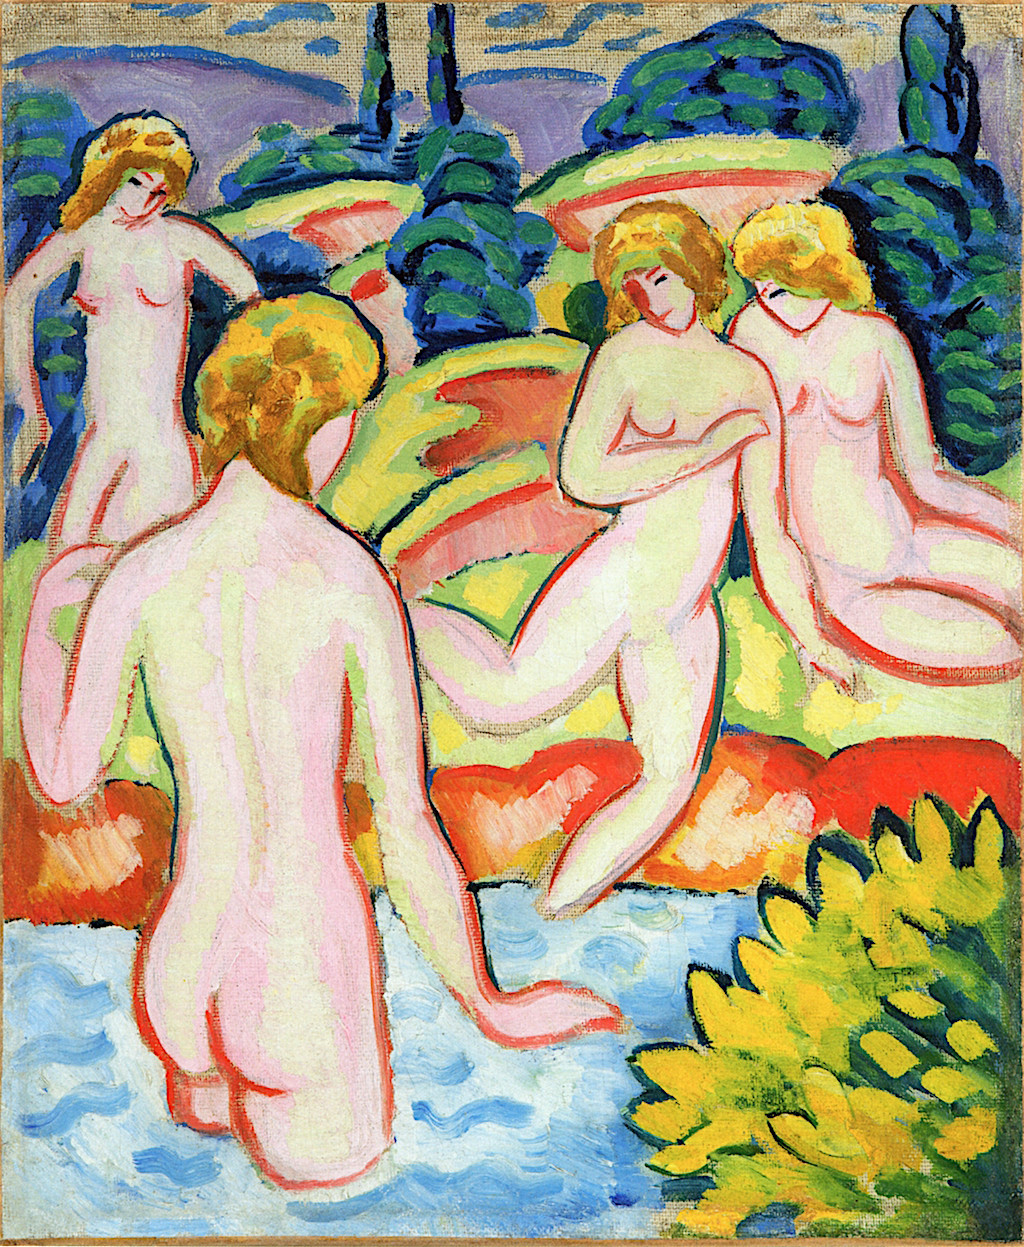 Bathers with Trees of Life m  1910